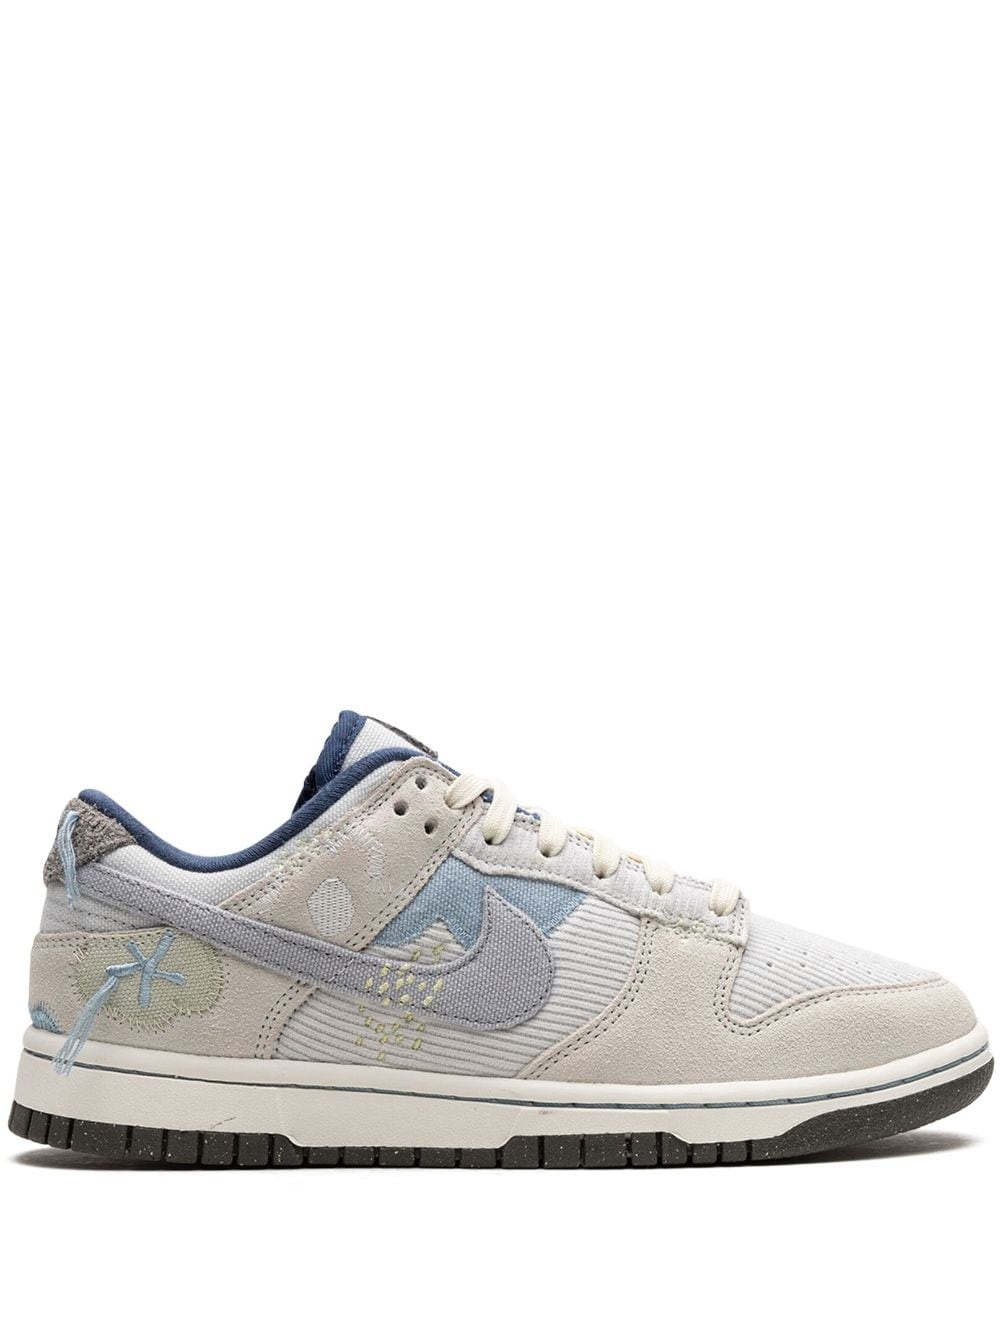 Dunk Low "Photon Dust" sneakers - 1